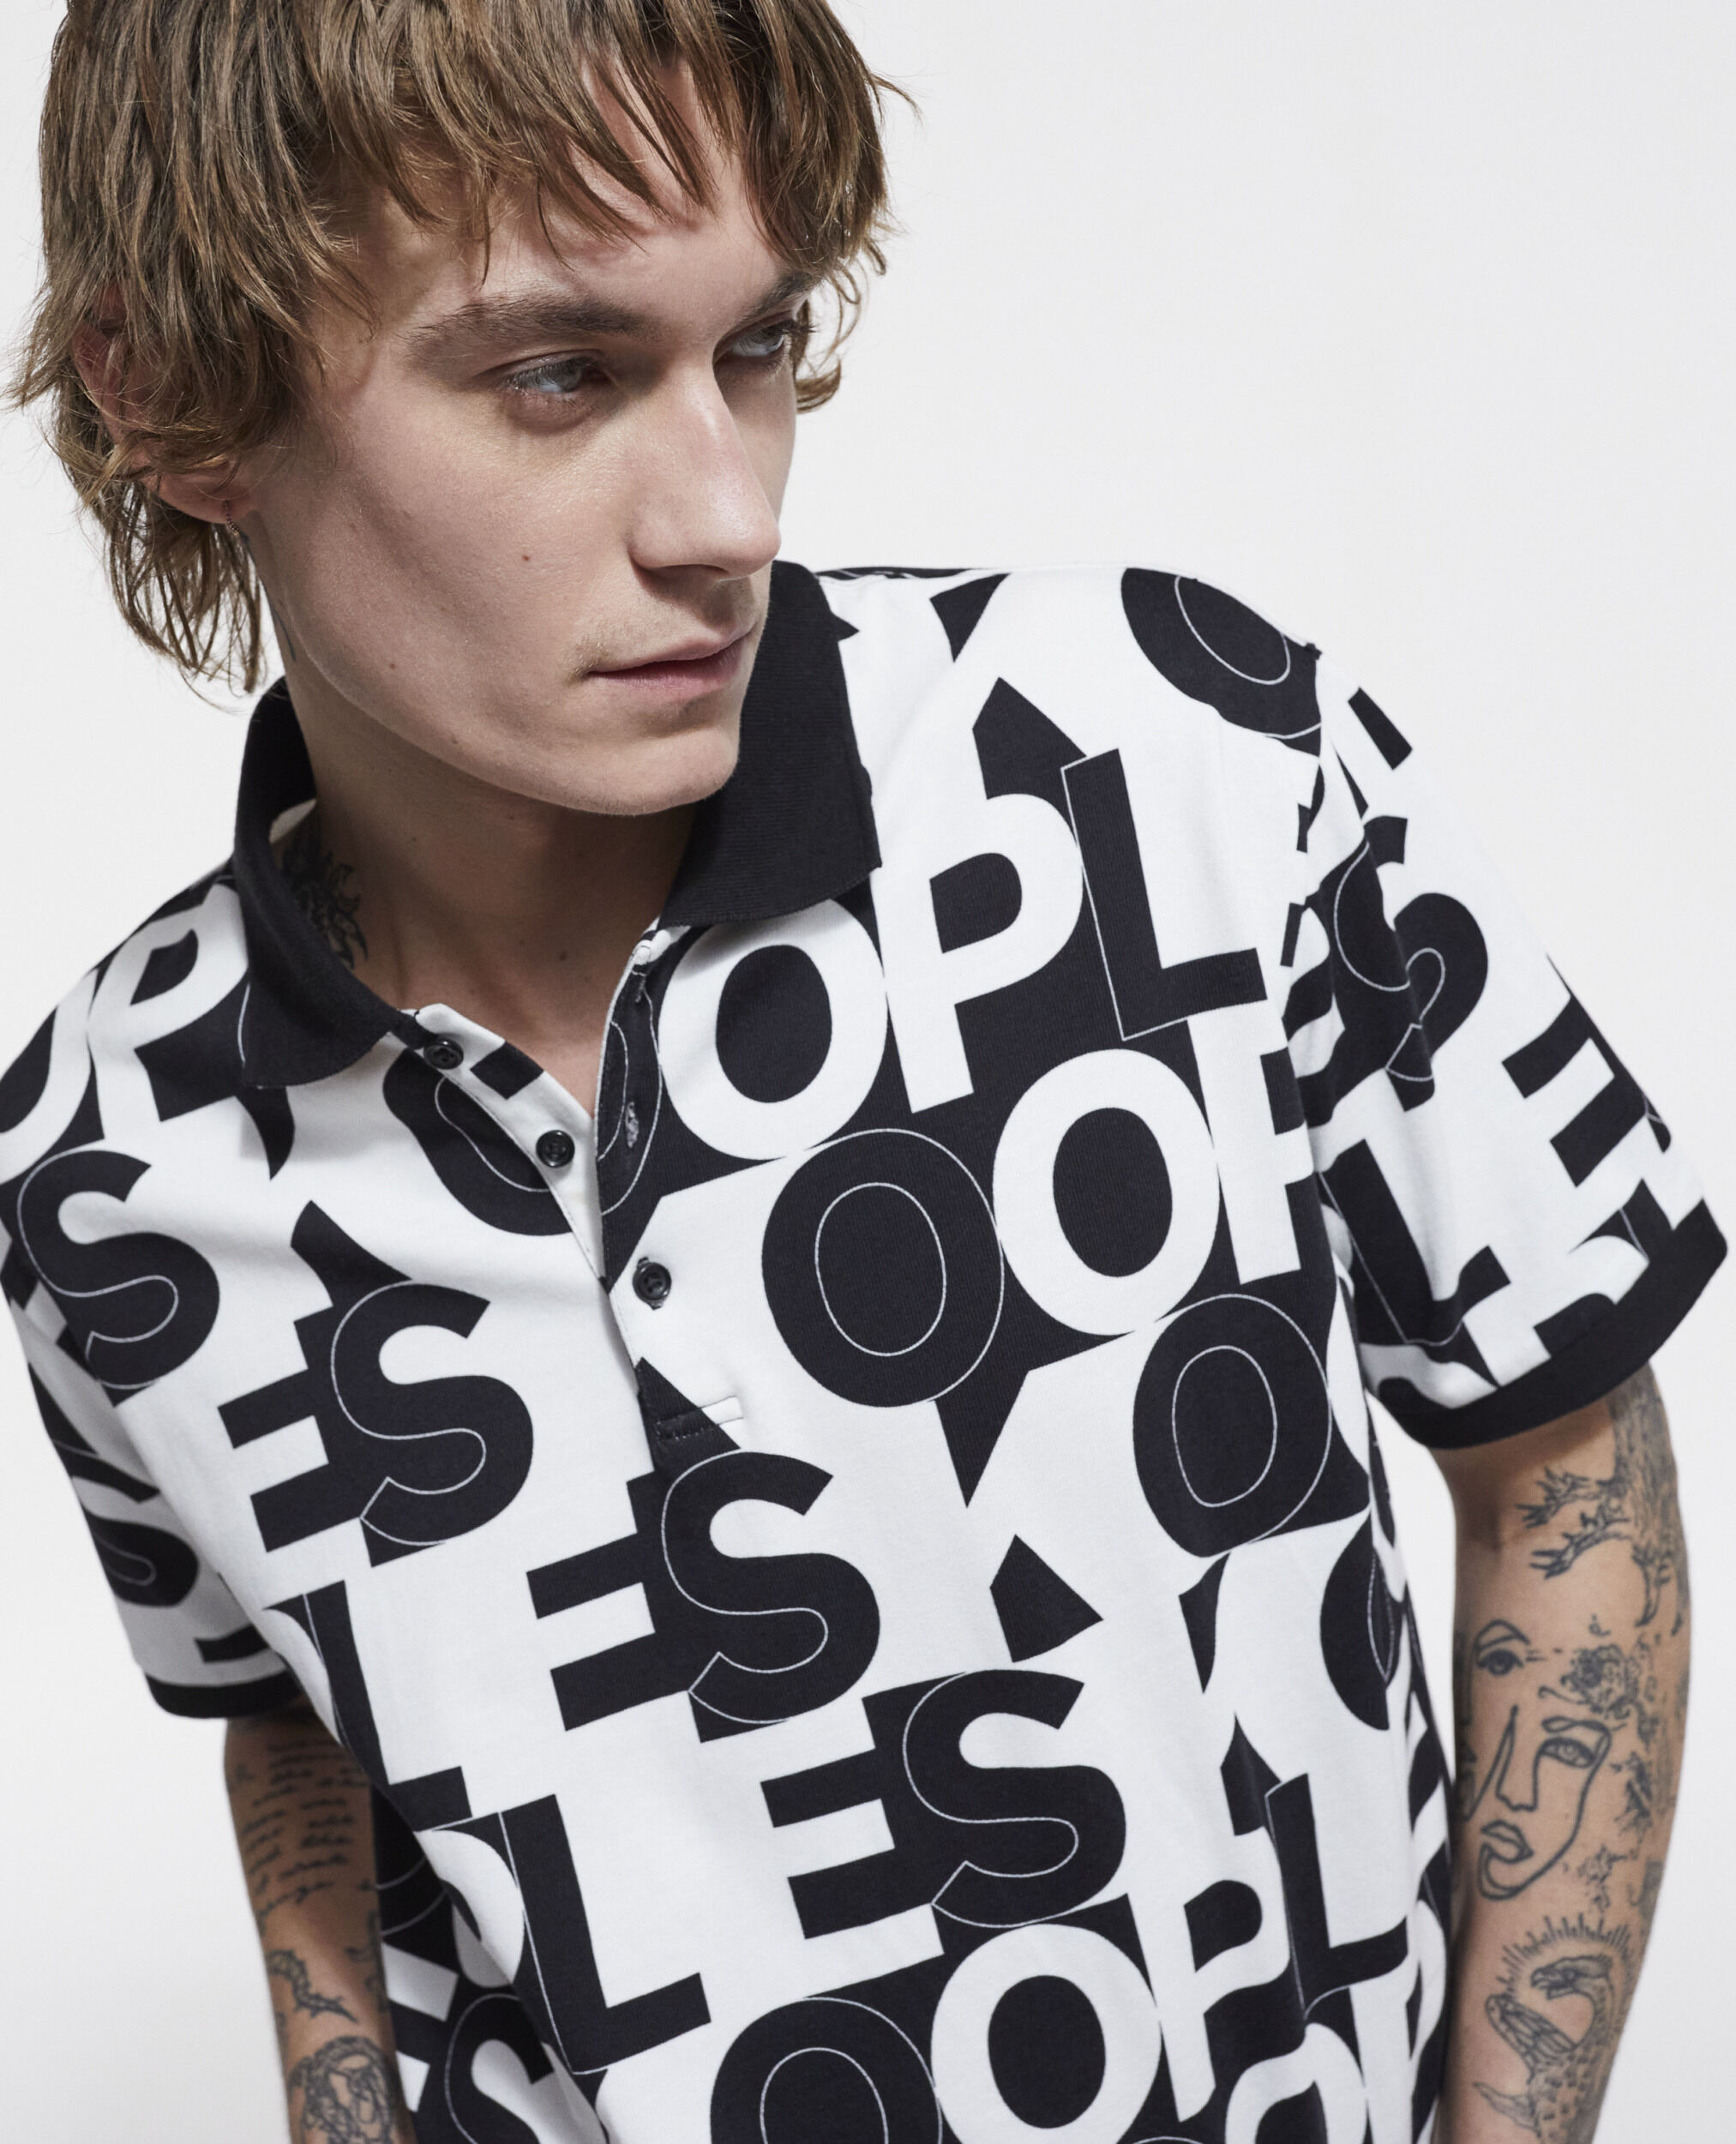 Camisa polo The Kooples, BLACK / WHITE, hi-res image number null